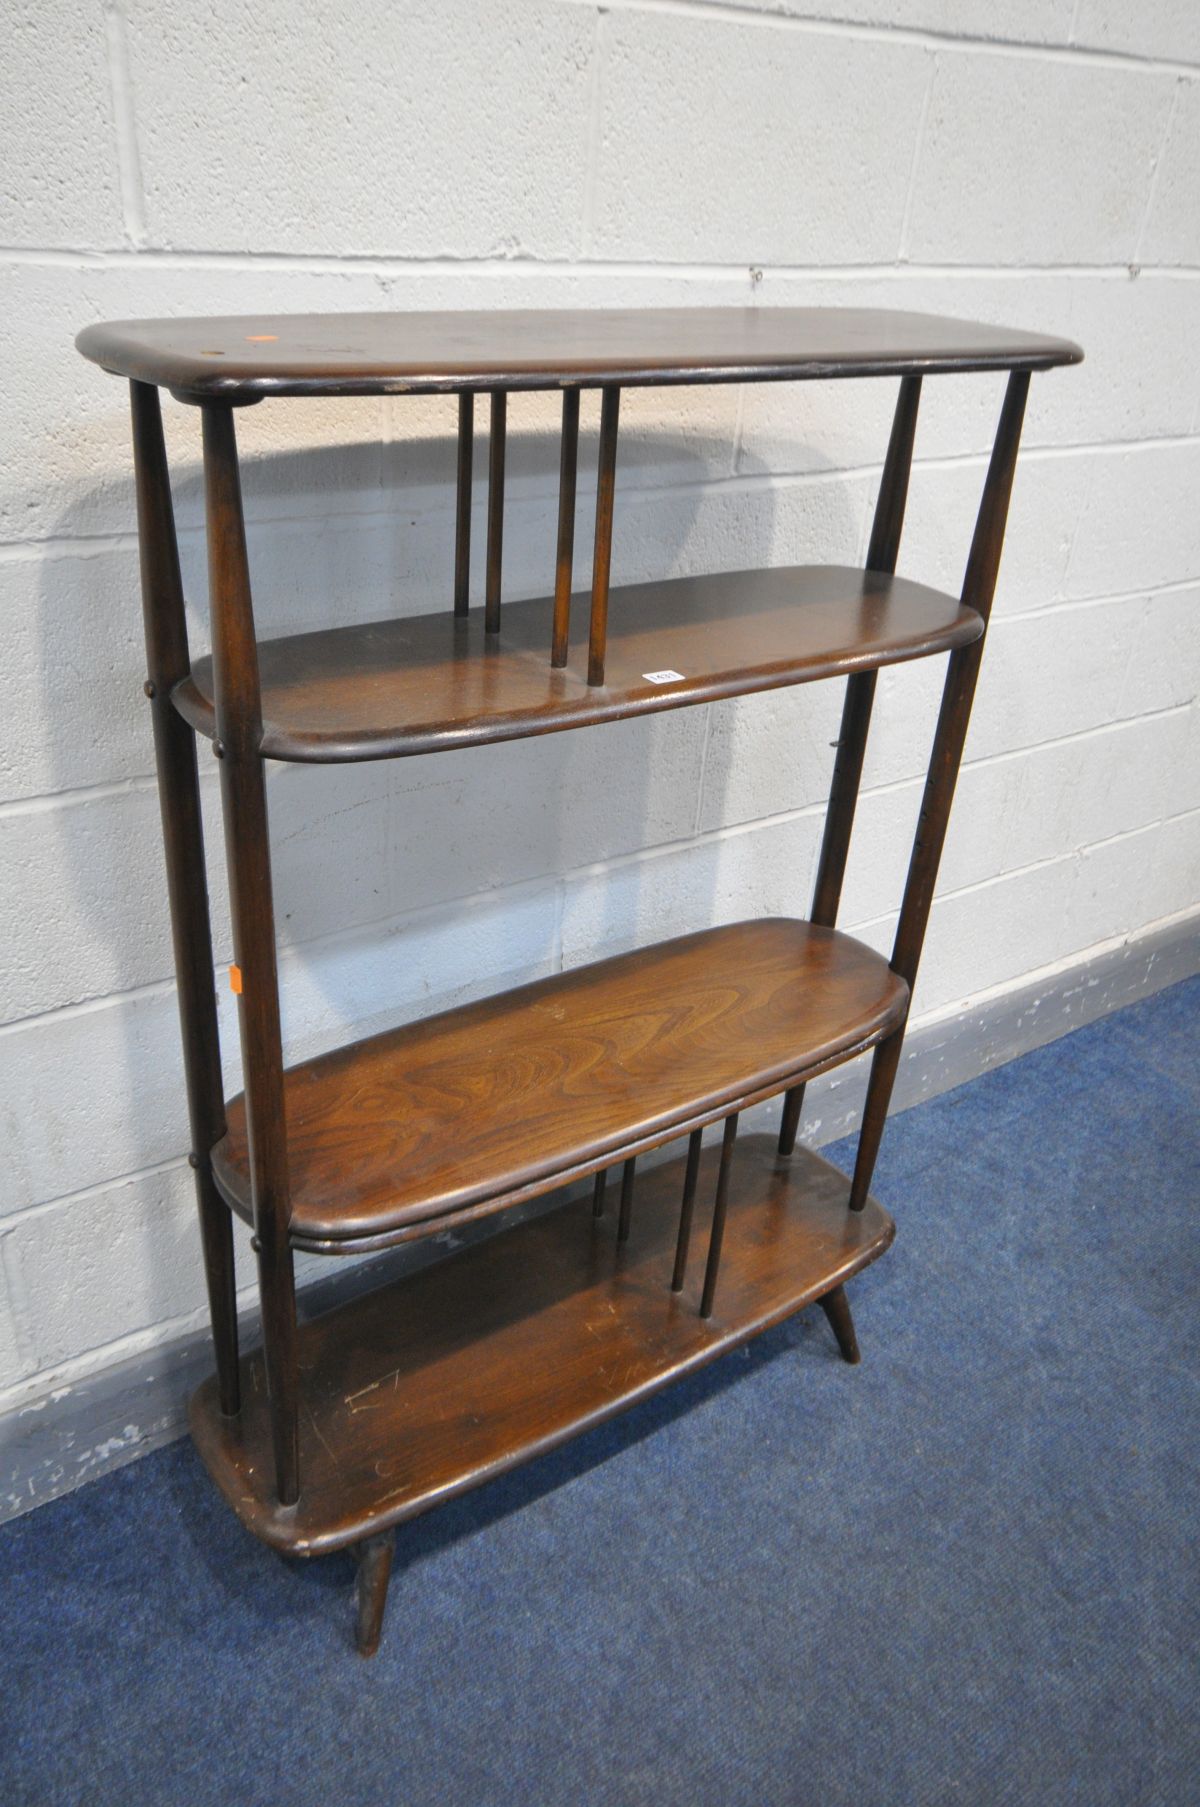 AN ERCOL WINDSOR ELM GIRAFFE BOOKCASE/ROOM DIVIDER, made up of three shelves, with spindled dividers - Image 2 of 2